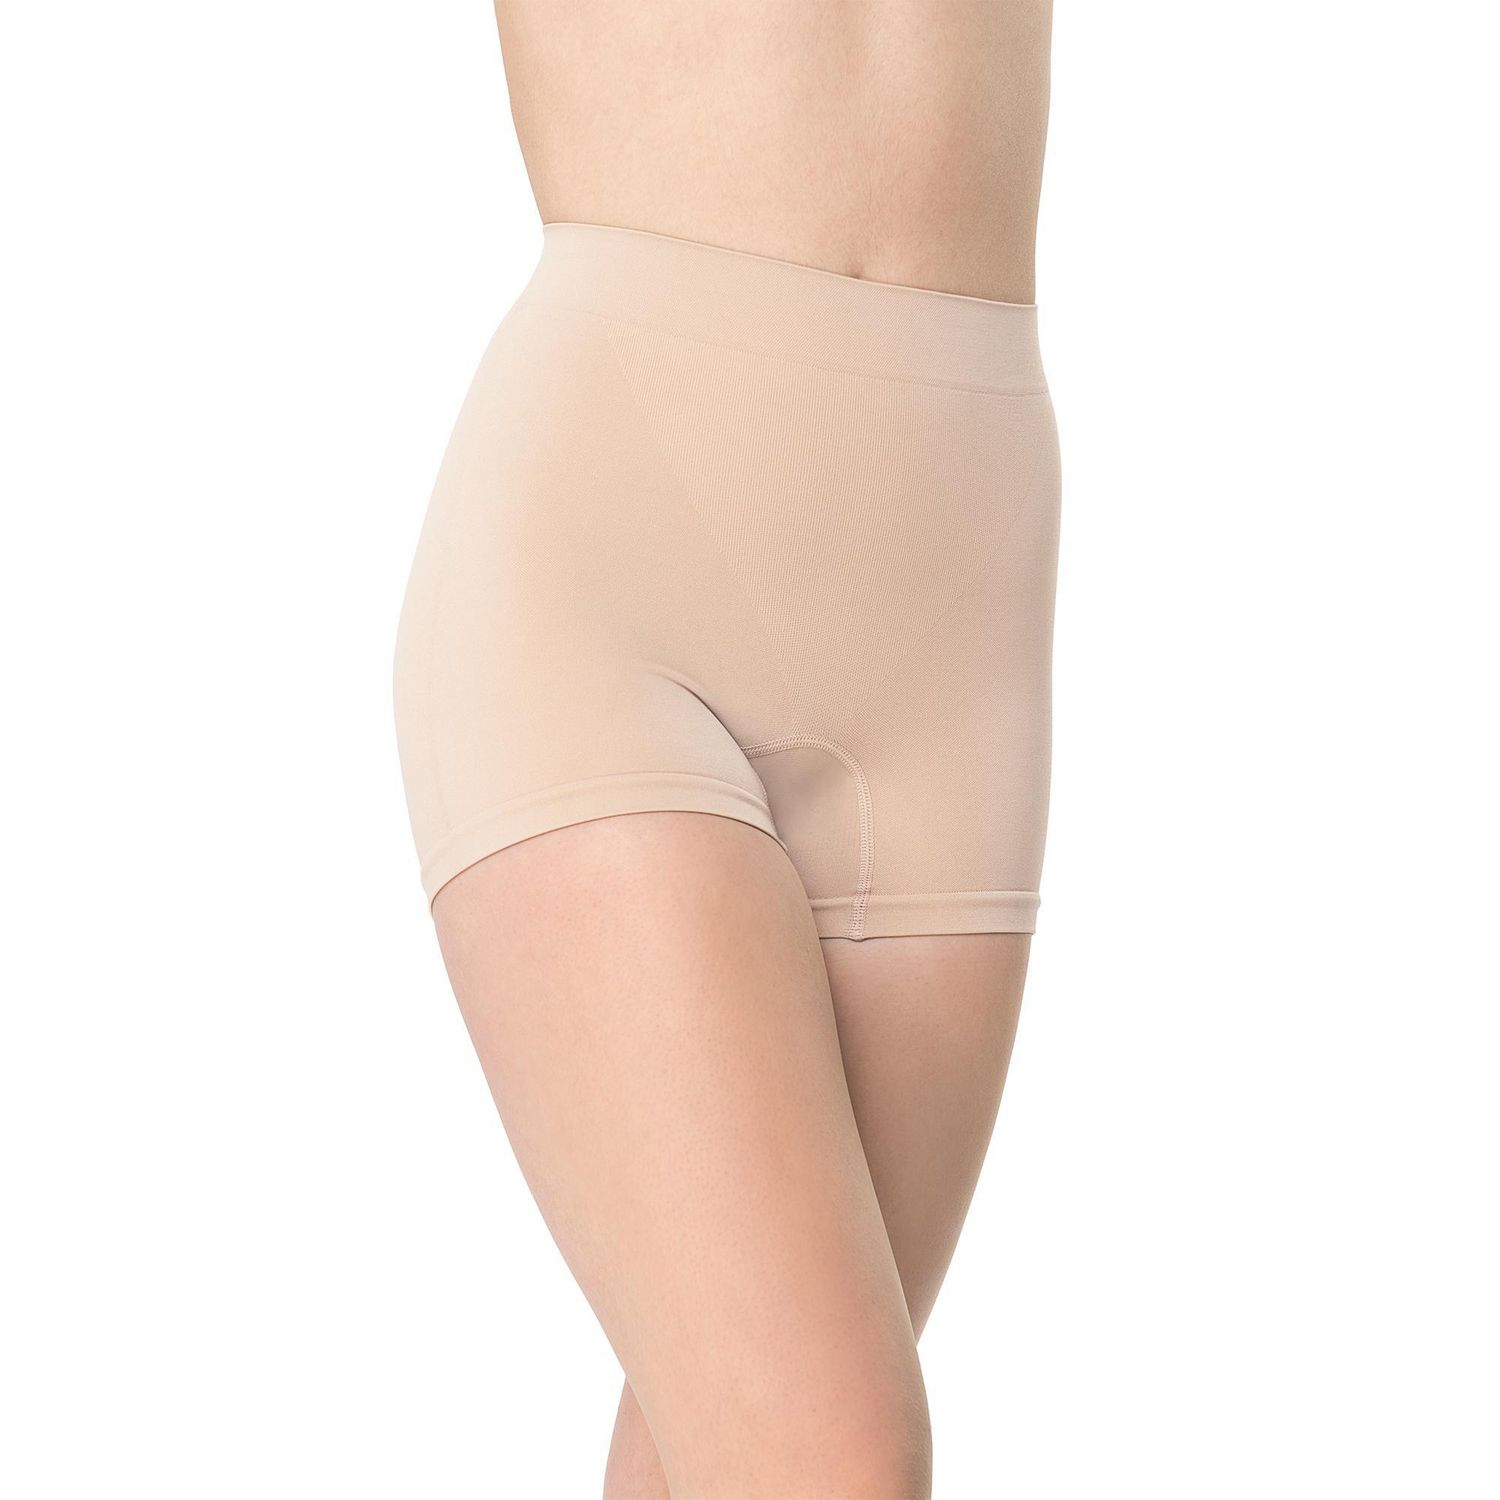 Seamless & Lightweight Shapewear shorts that INSTANTLY smooths any